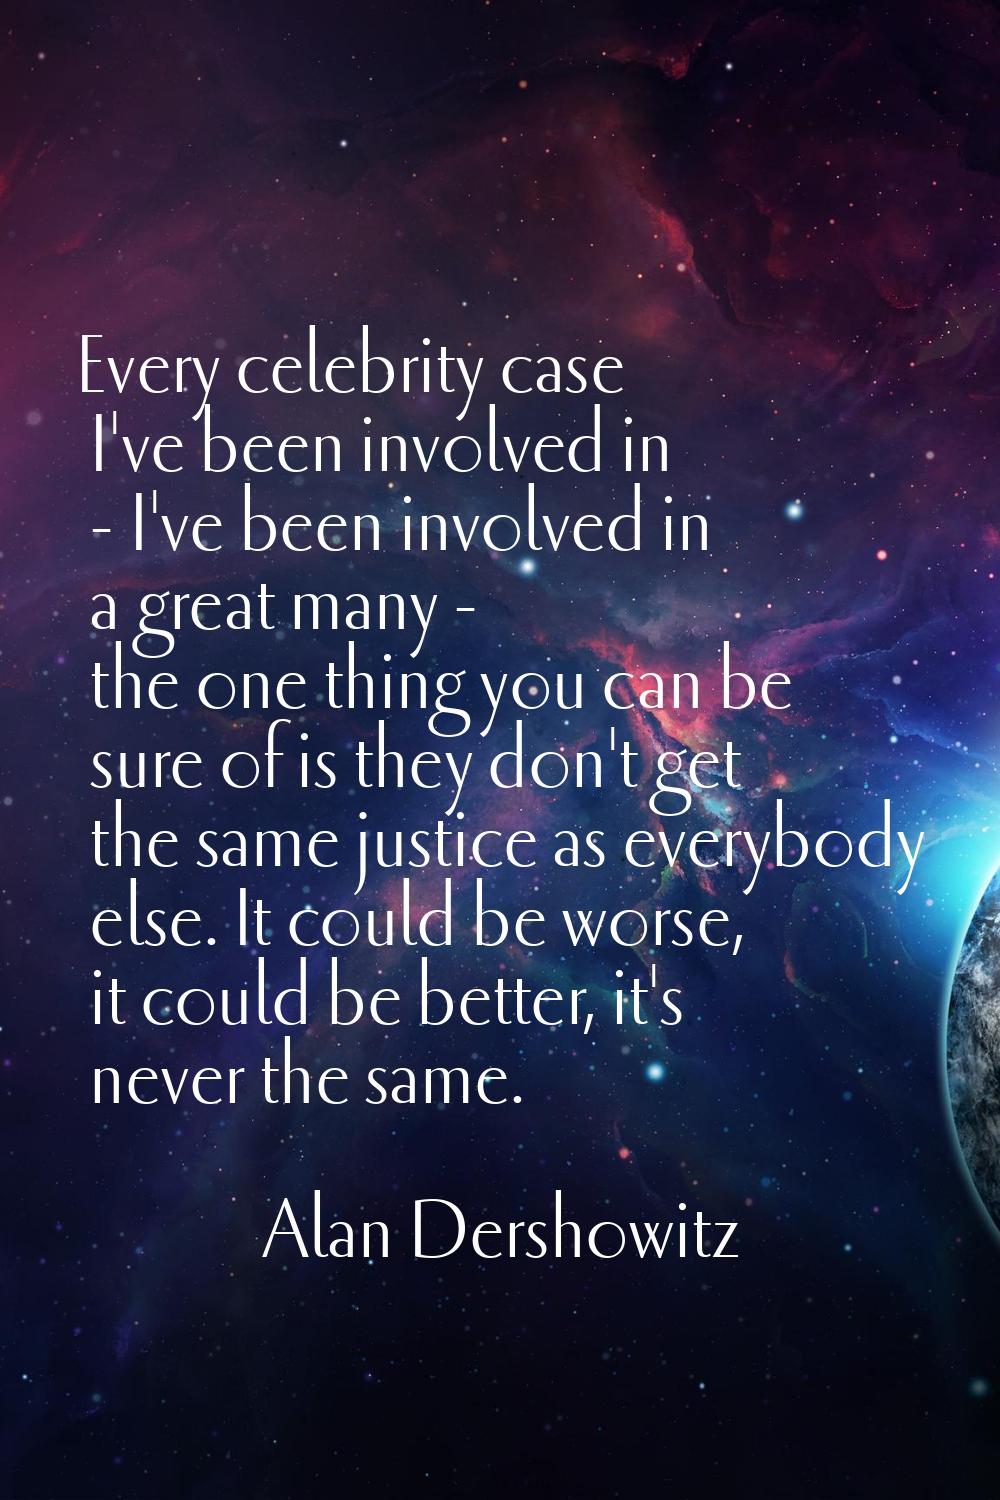 Every celebrity case I've been involved in - I've been involved in a great many - the one thing you